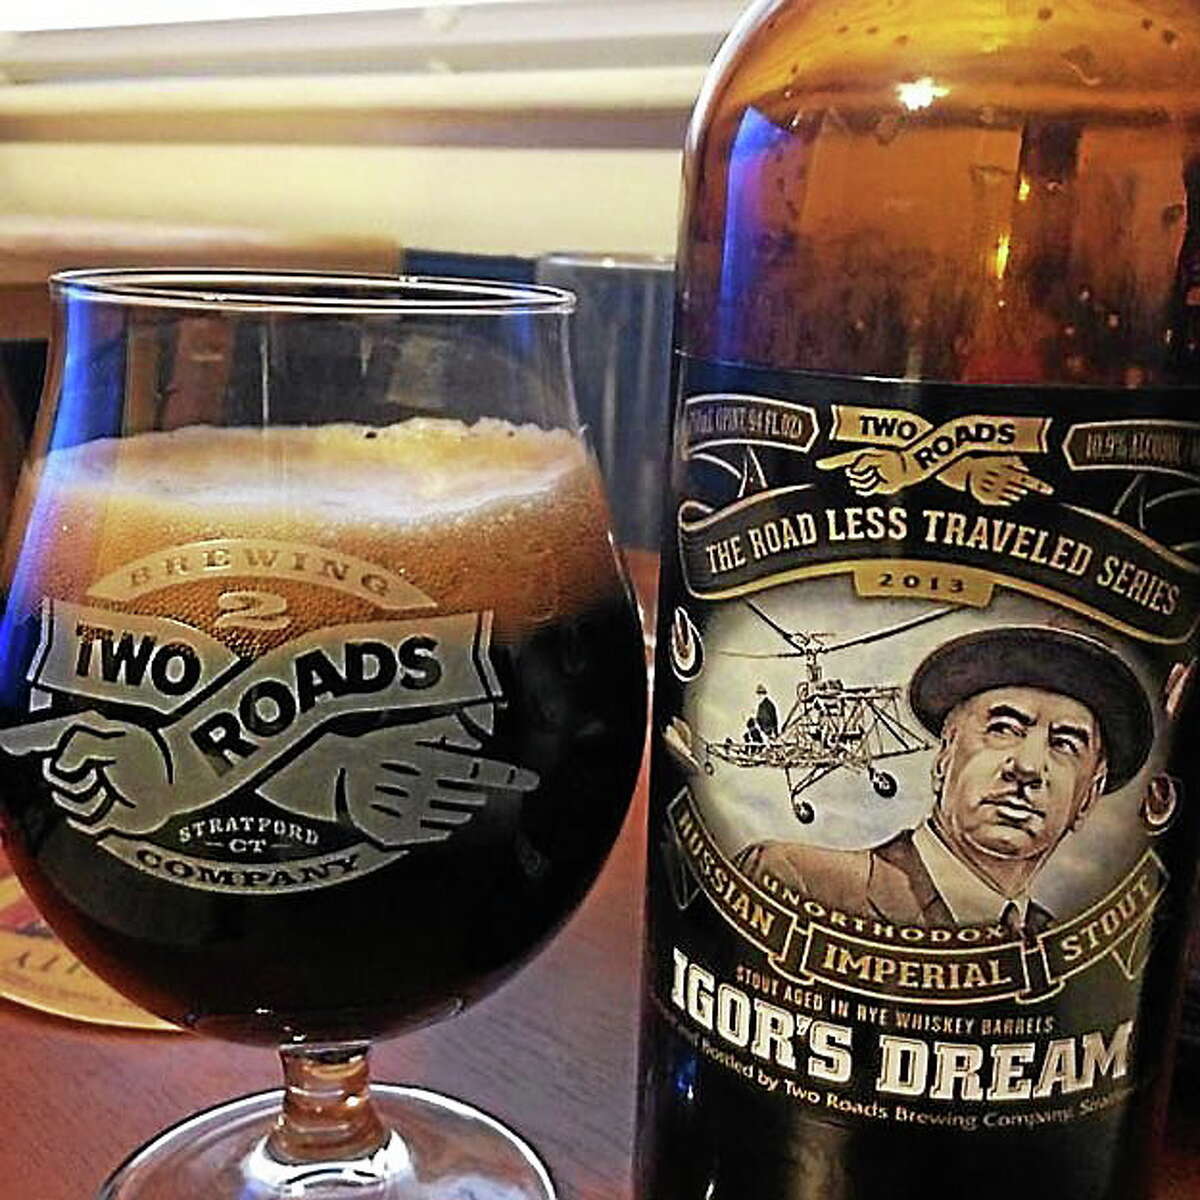 Igor's Dream Russian Imperial Stout – Rye Whiskey Barrel Aged